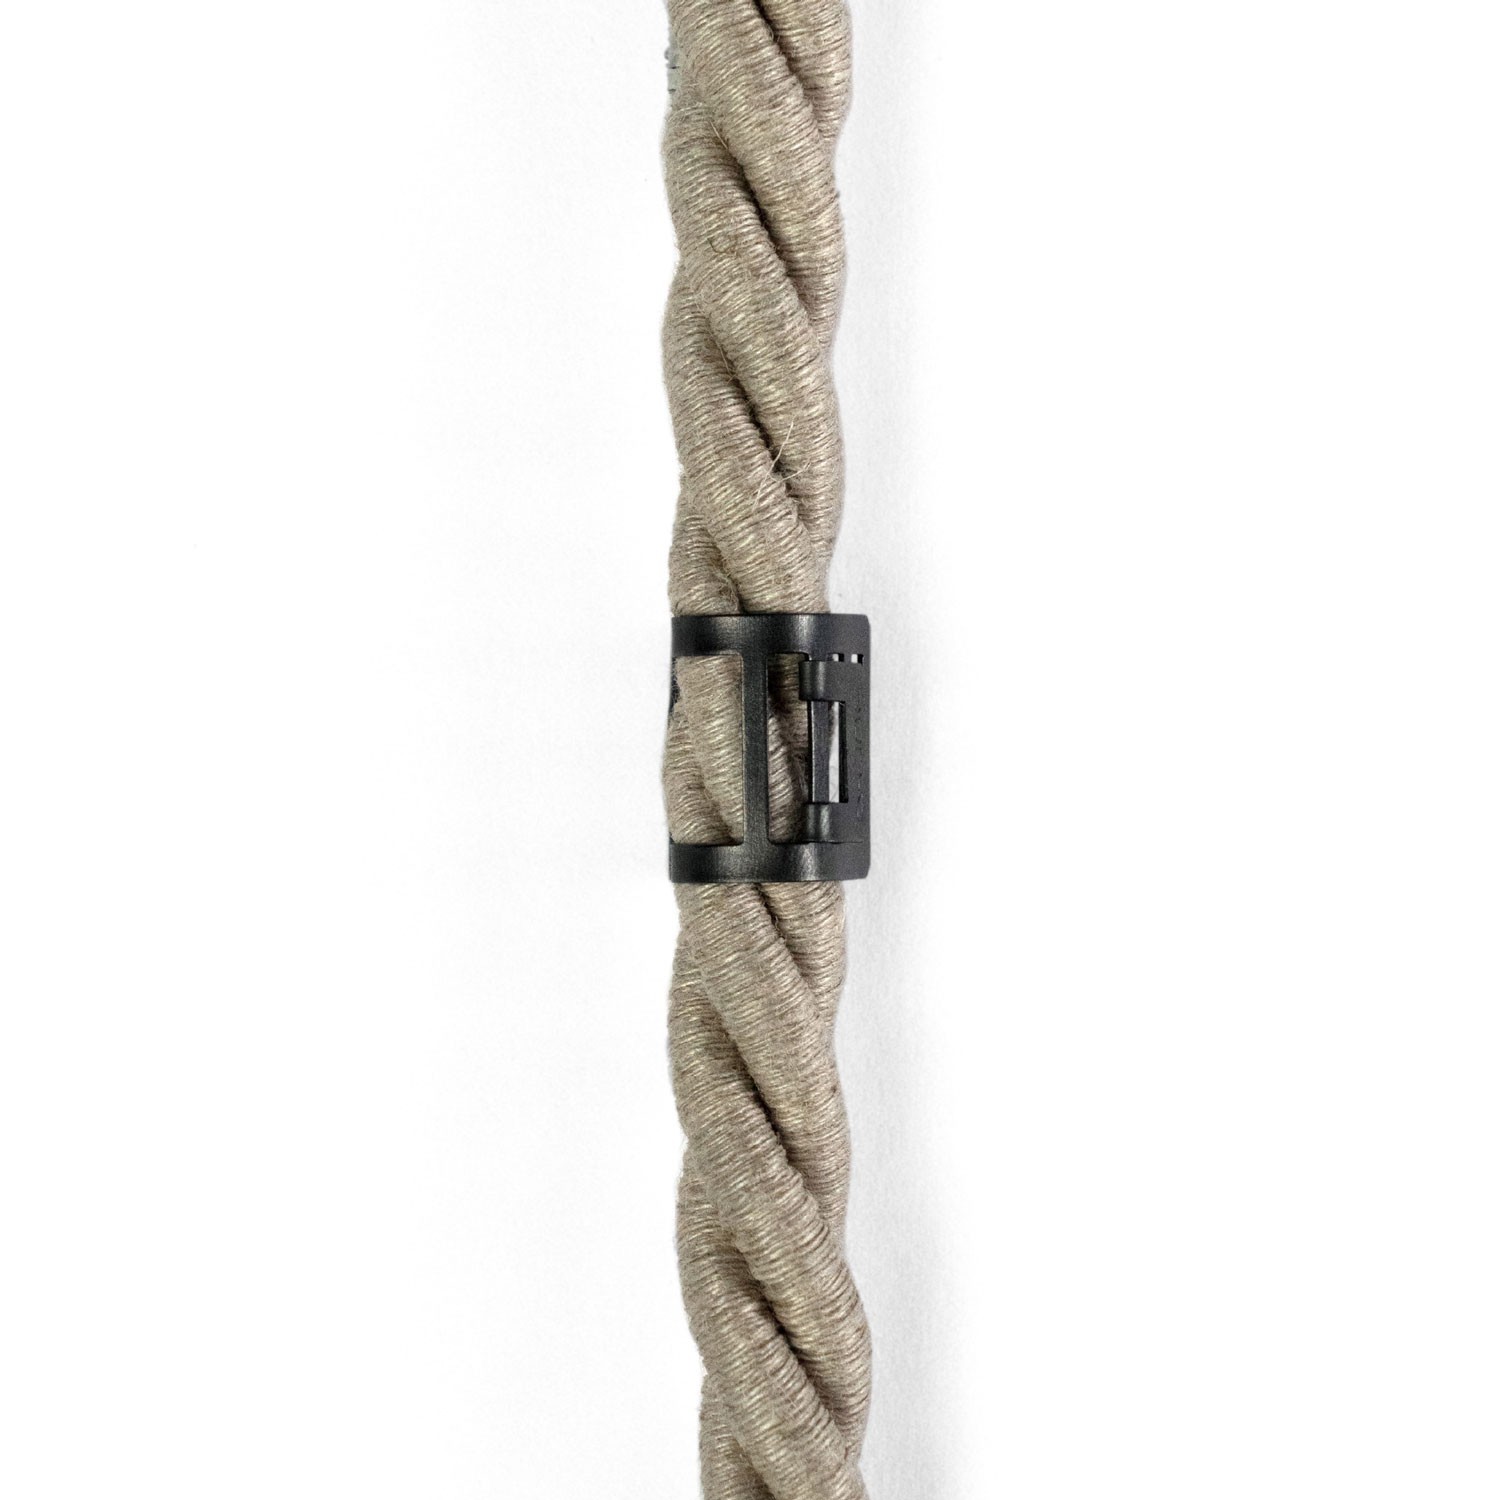 Metal cable tie clip for 16 mm diameter rope cable